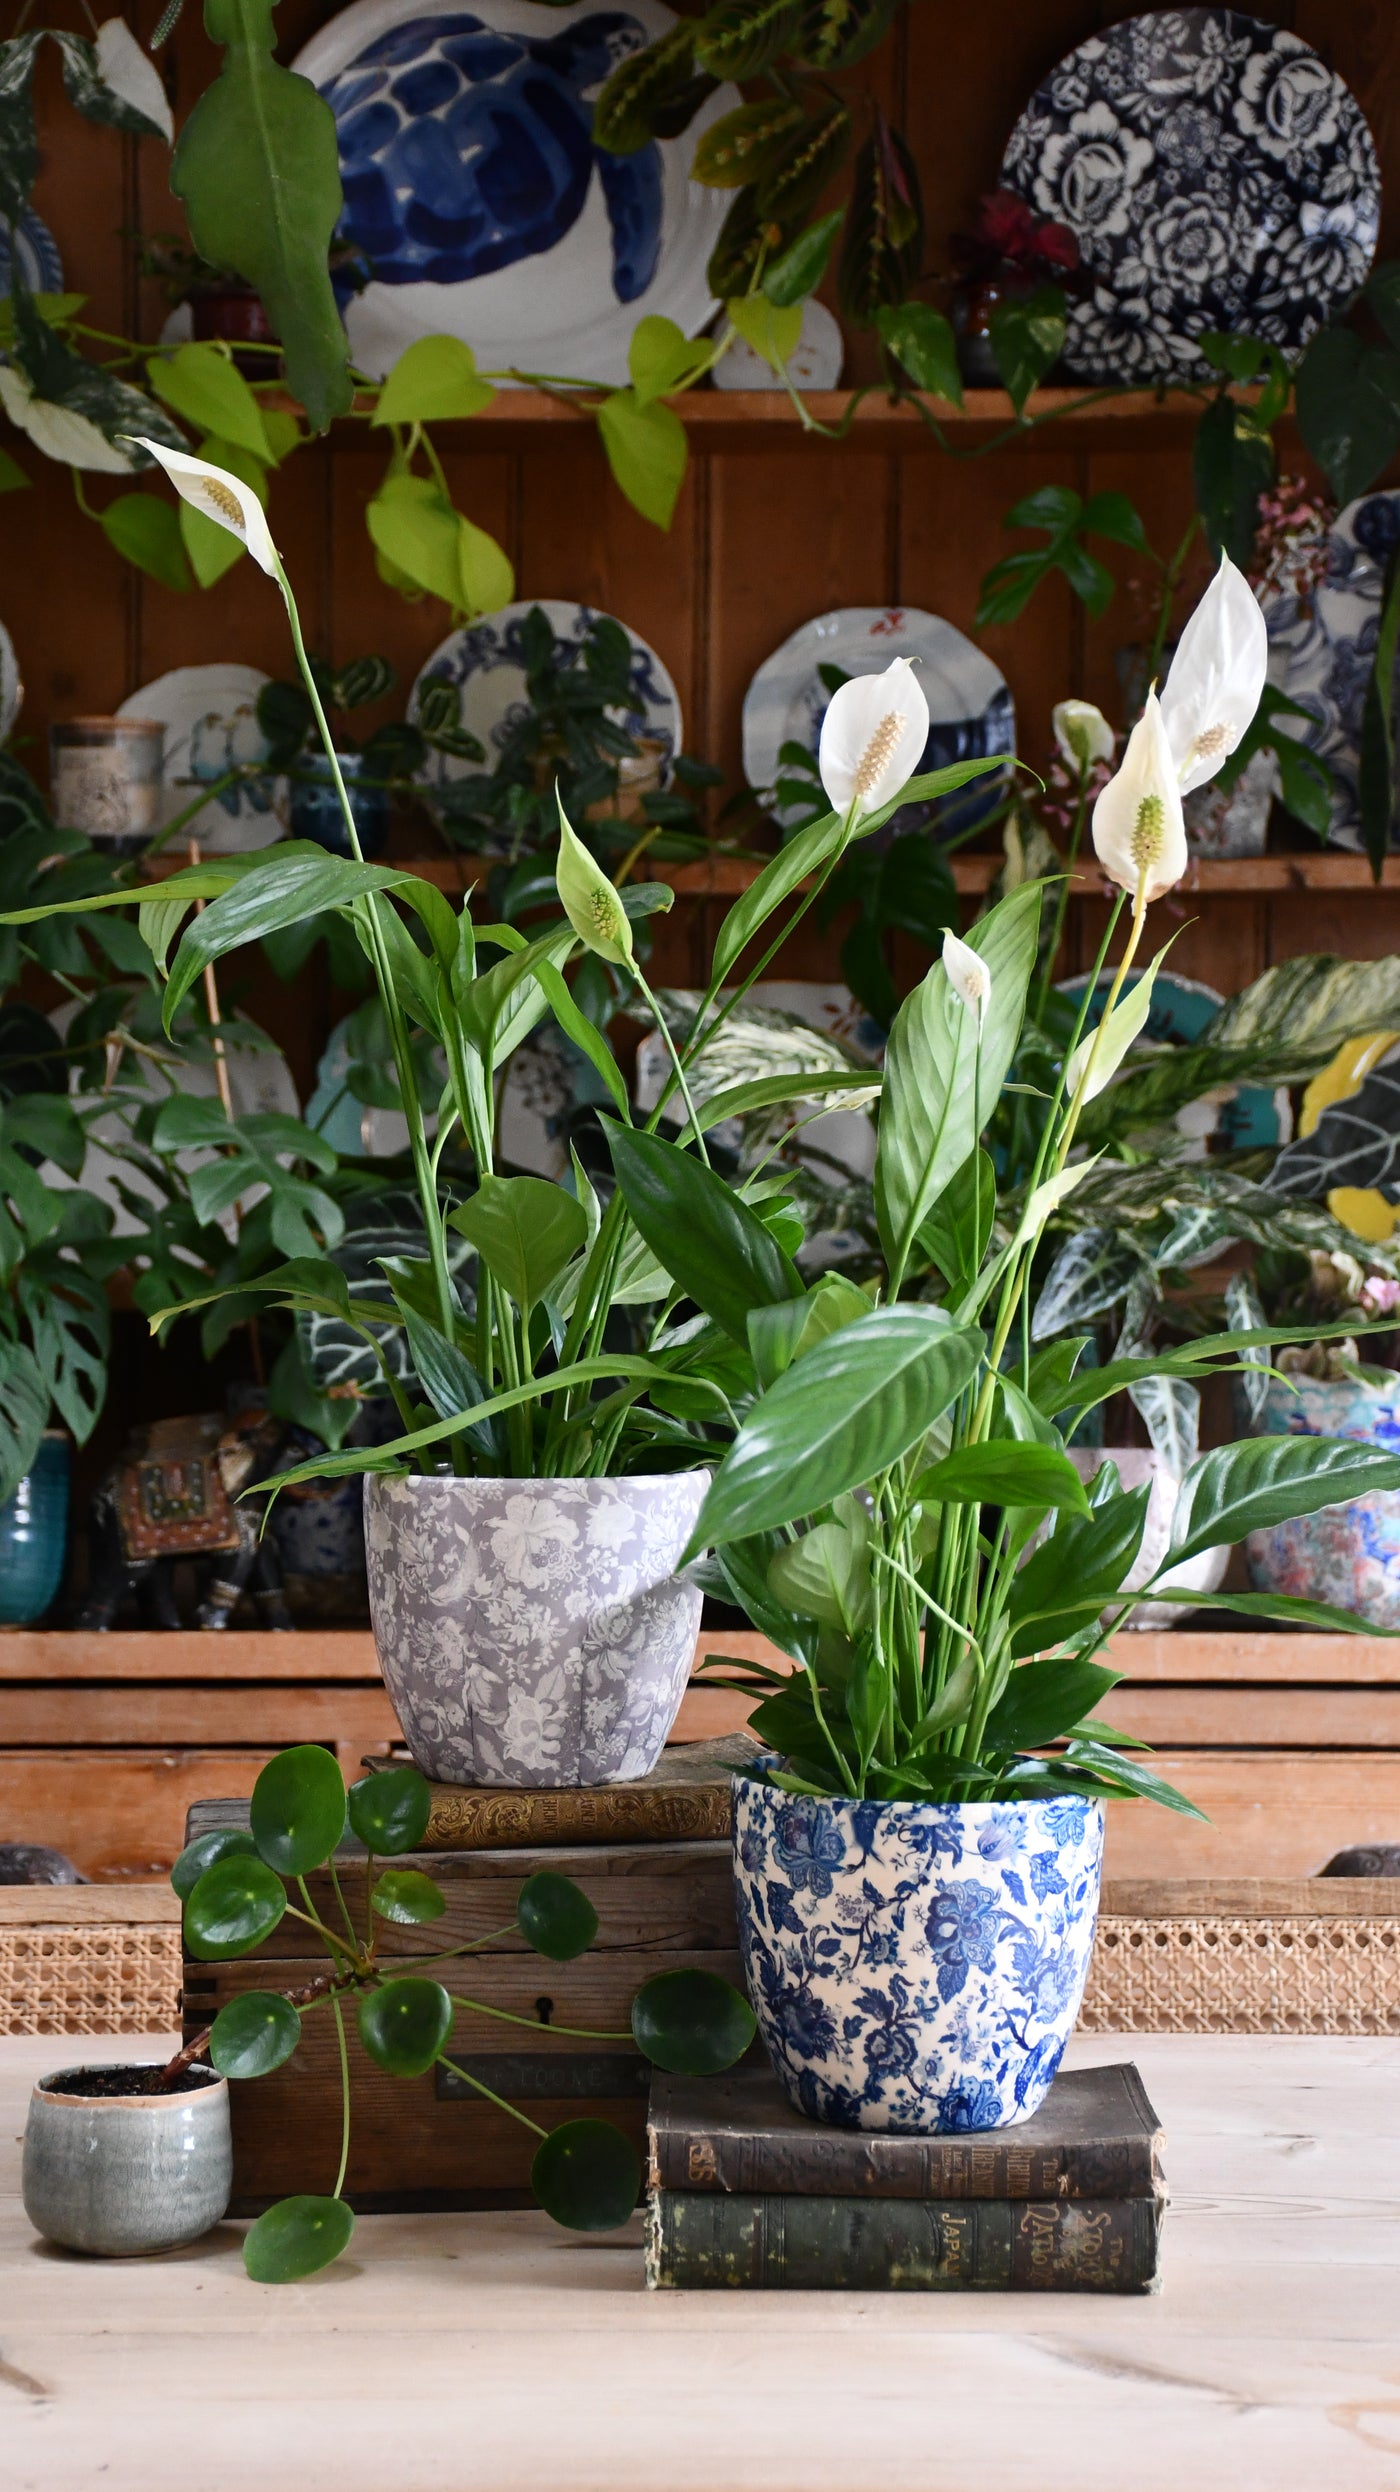 Peace Lily (Spathiphyllum) & Monza Planter